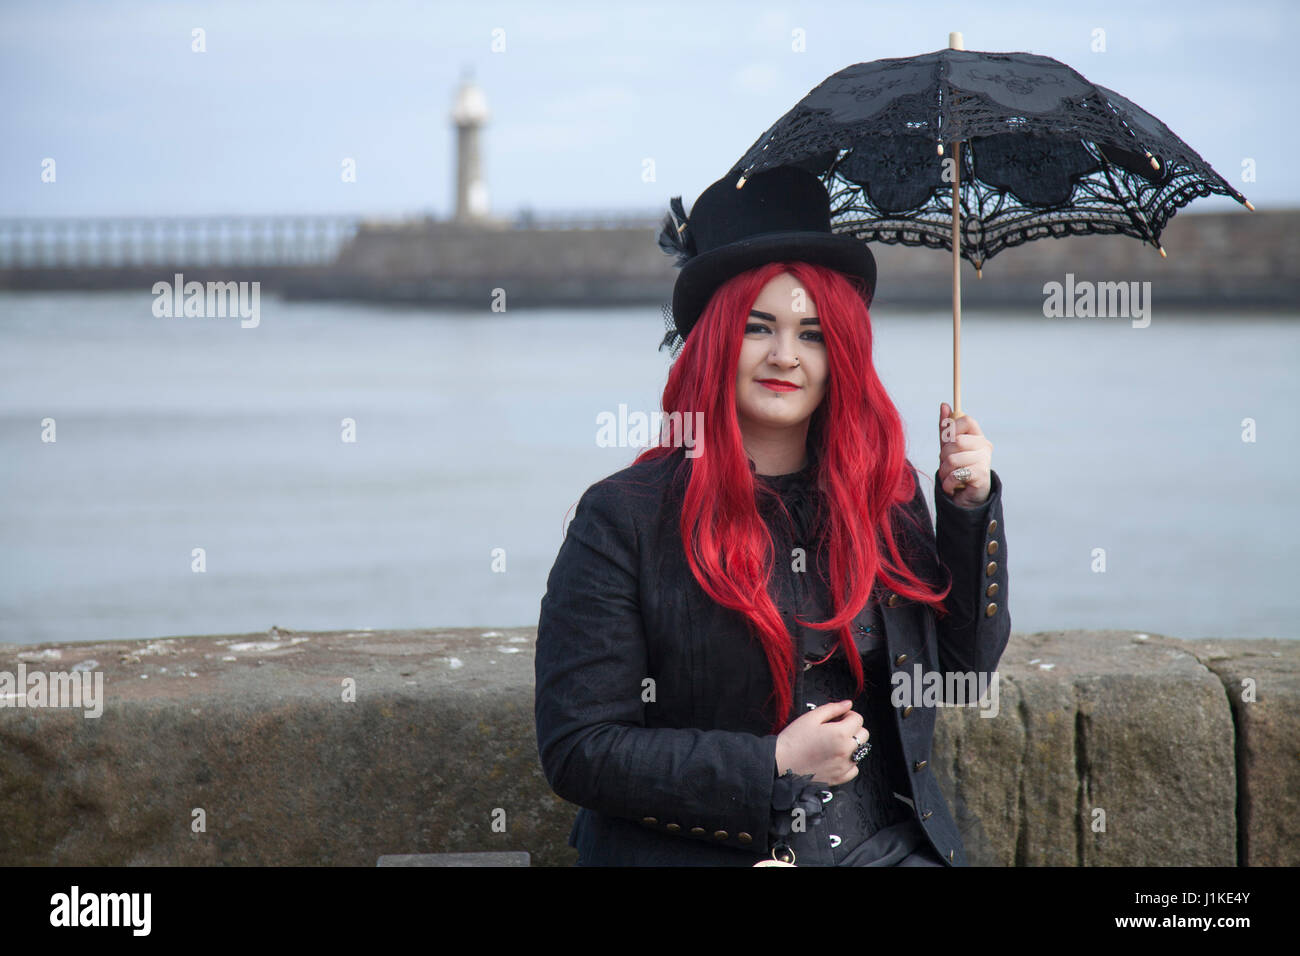 A young female Goth poses for photos at the Whiby quayside Credit: David Dixon/Alamy Live News Stock Photo